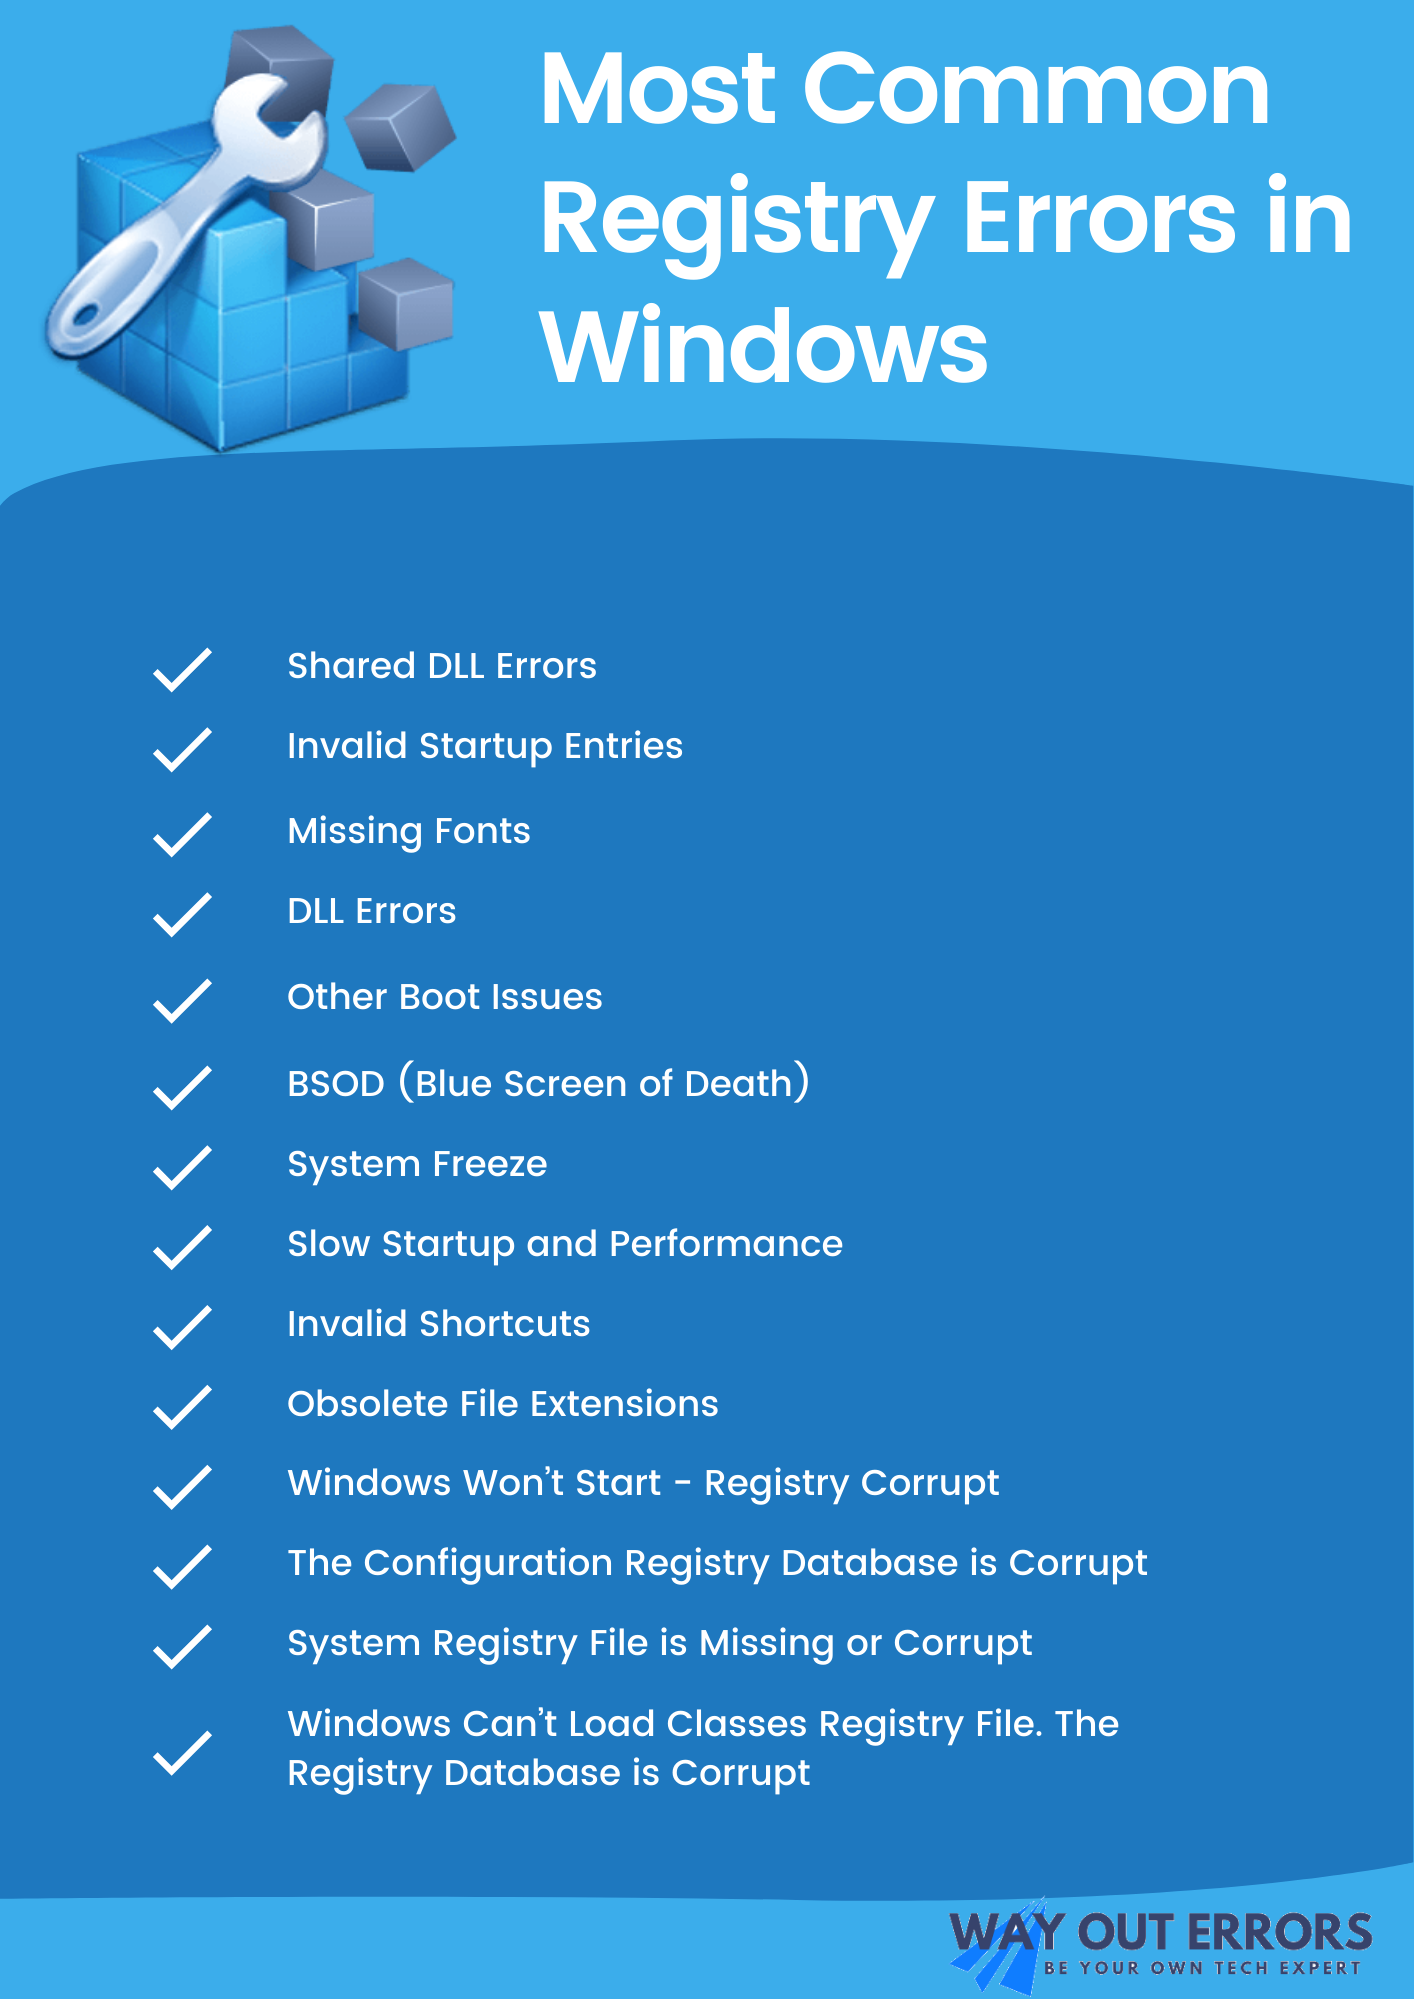 How to Fix Corrupt Windows Registry Files | Tested Solutions